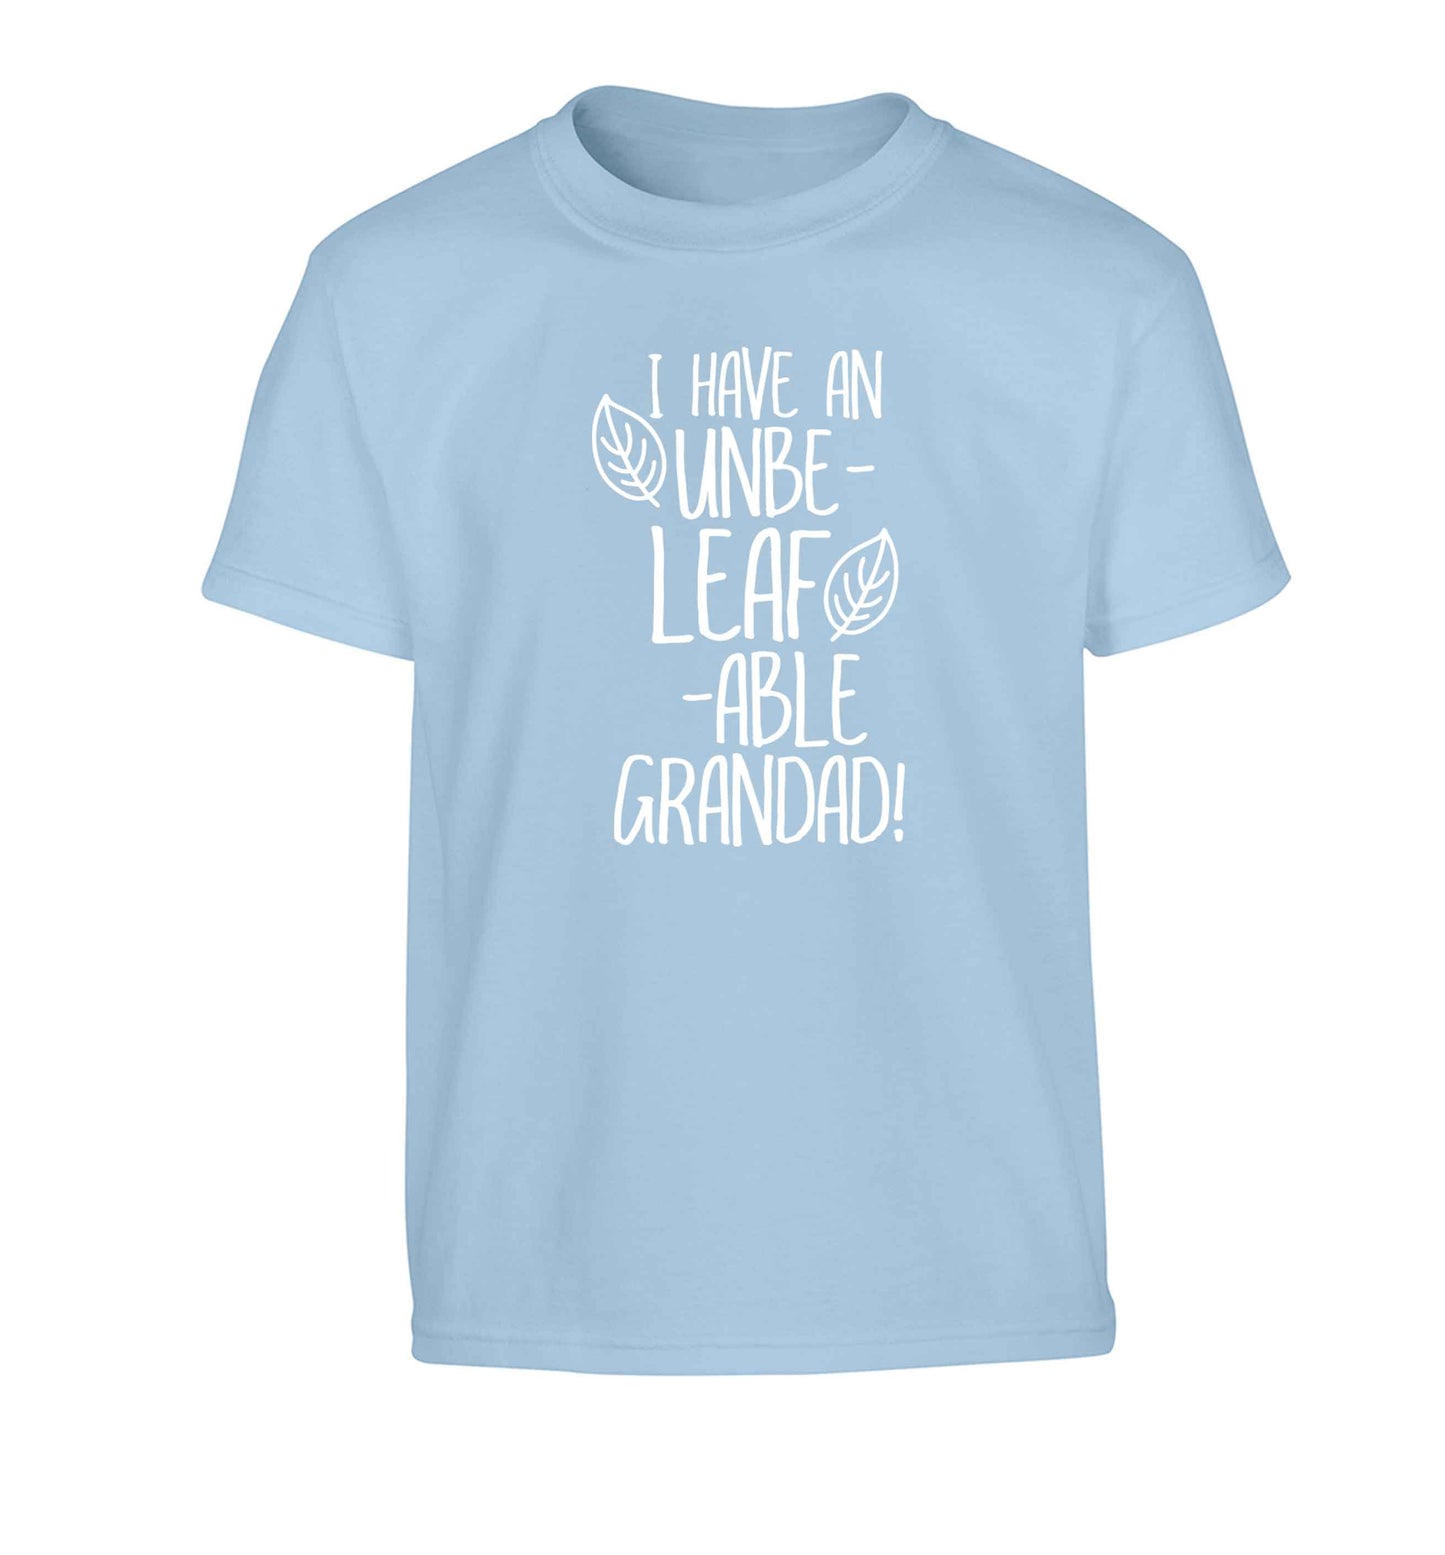 I have an unbe-leaf-able grandad Children's light blue Tshirt 12-13 Years